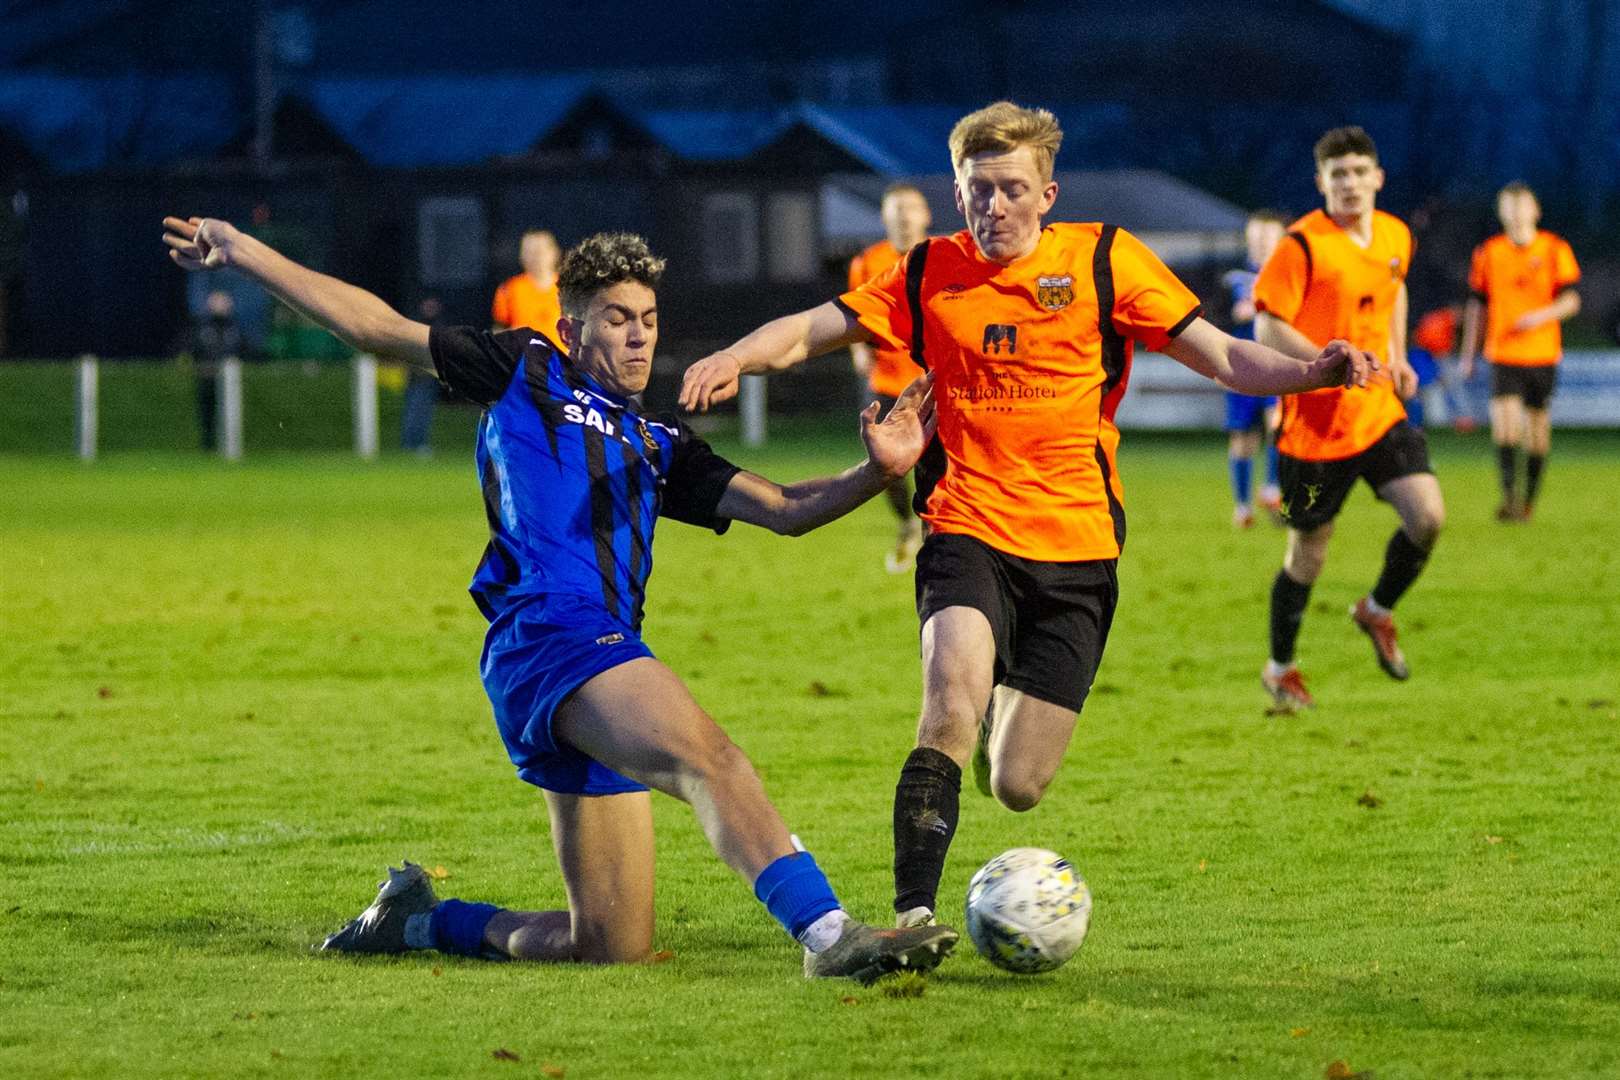 Ross Gunn (right) in action for Rothes. Picture: Daniel Forsyth